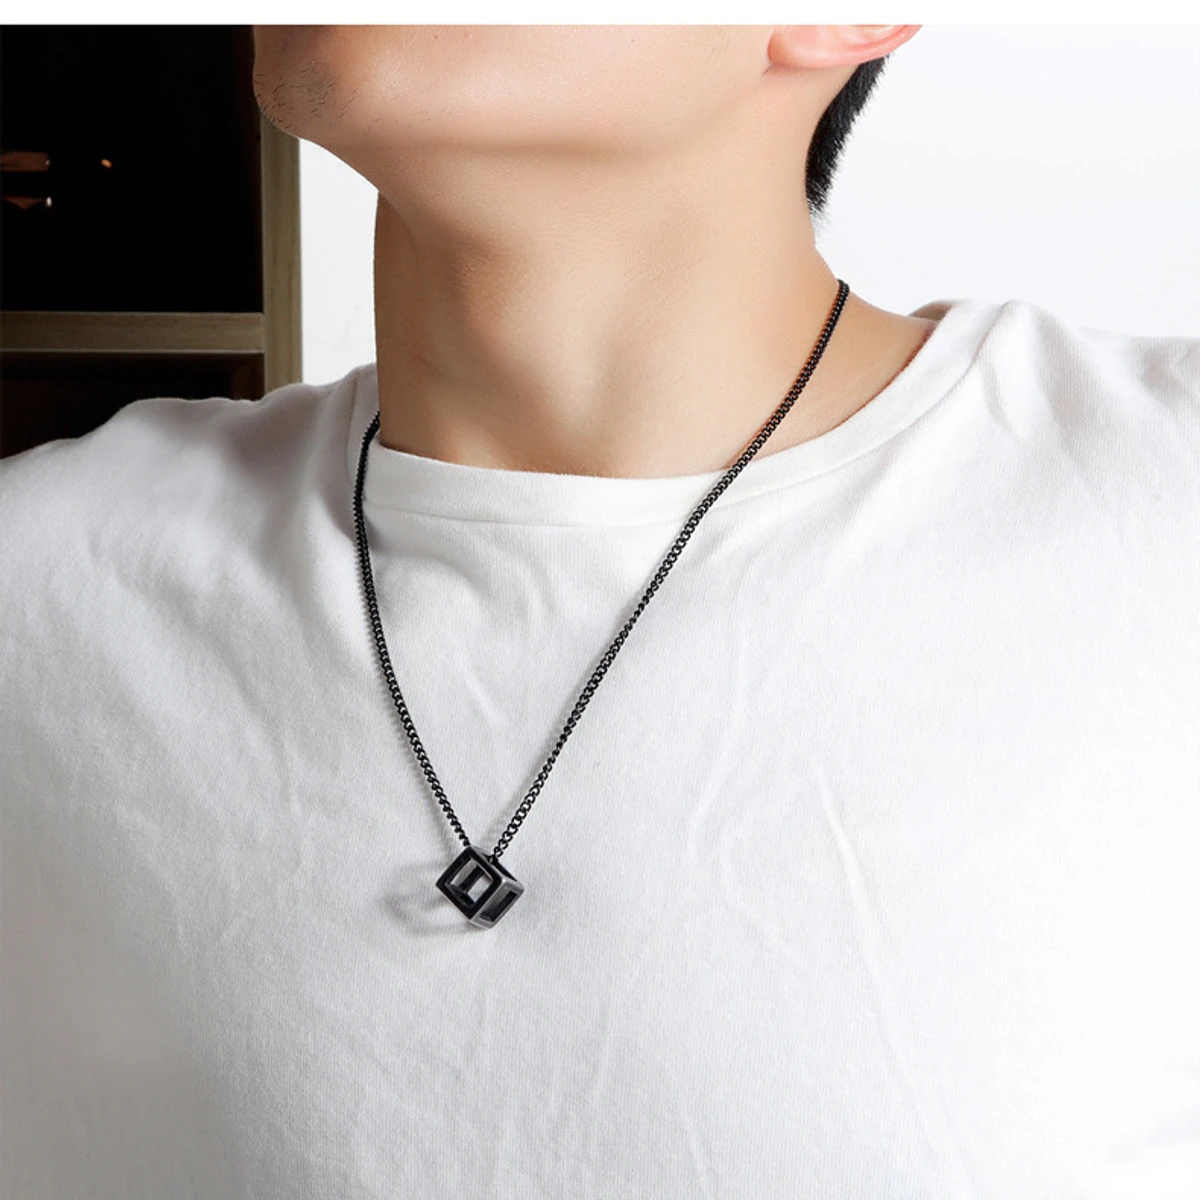 New Stainless Steel Stylish Necklaces For Men's